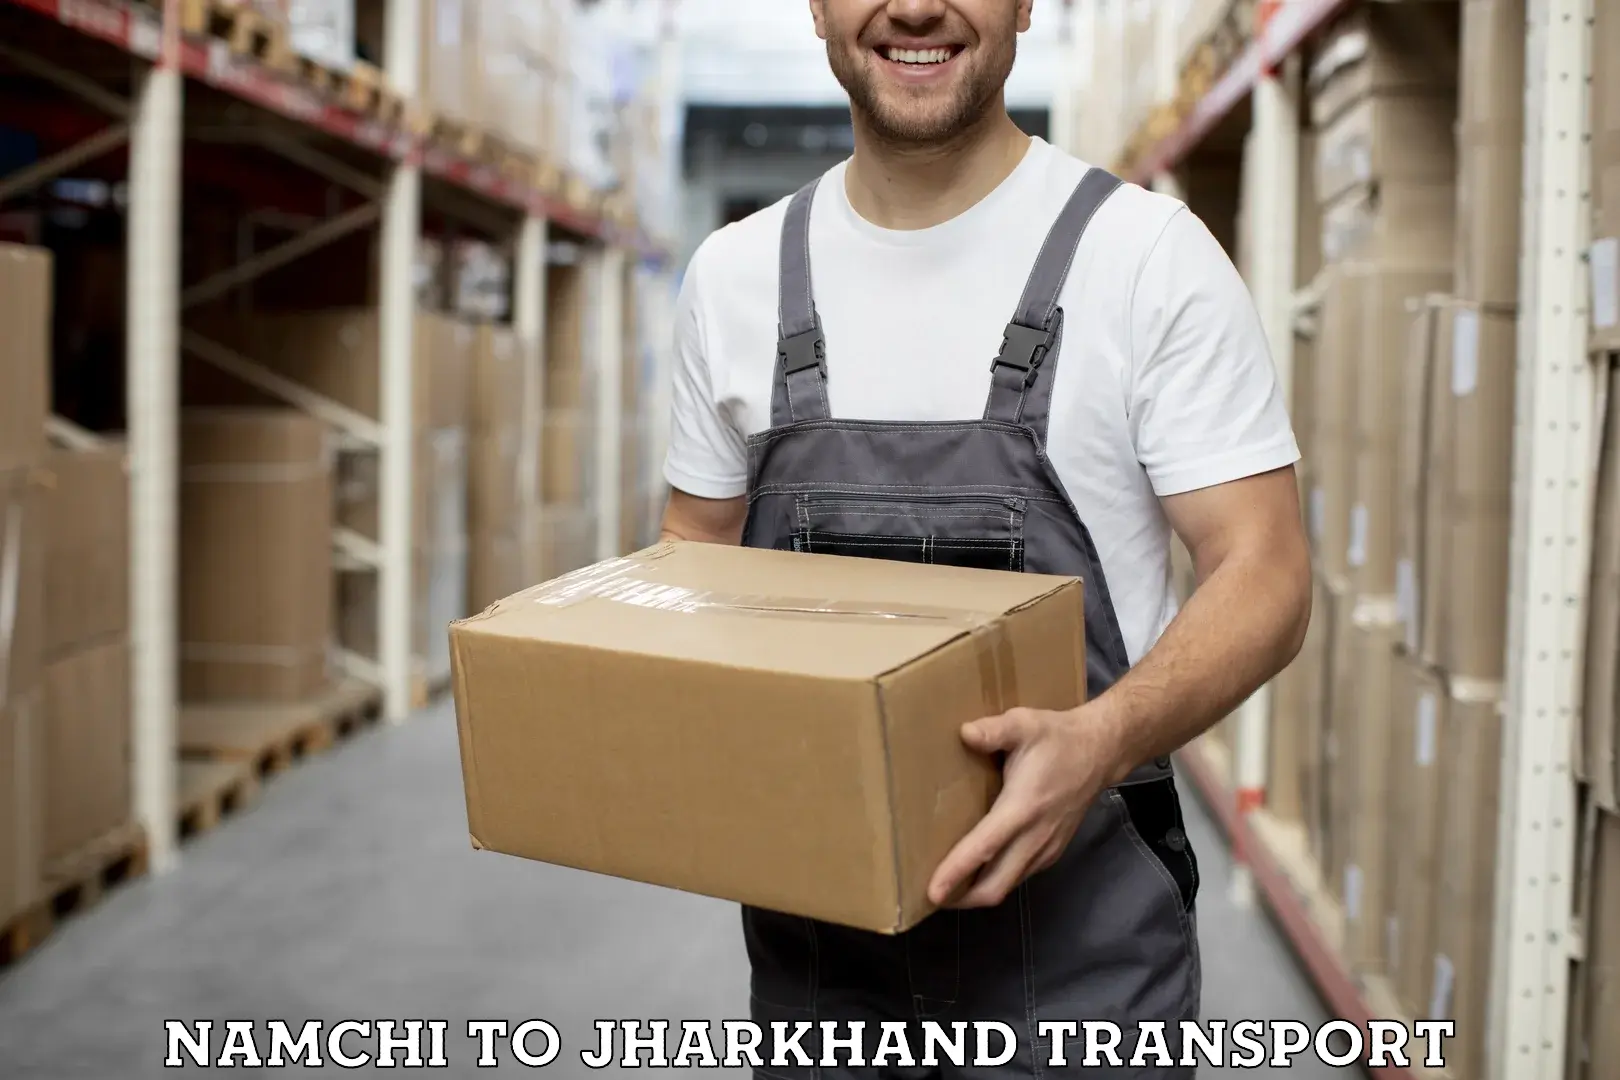 Container transport service Namchi to Jharkhand